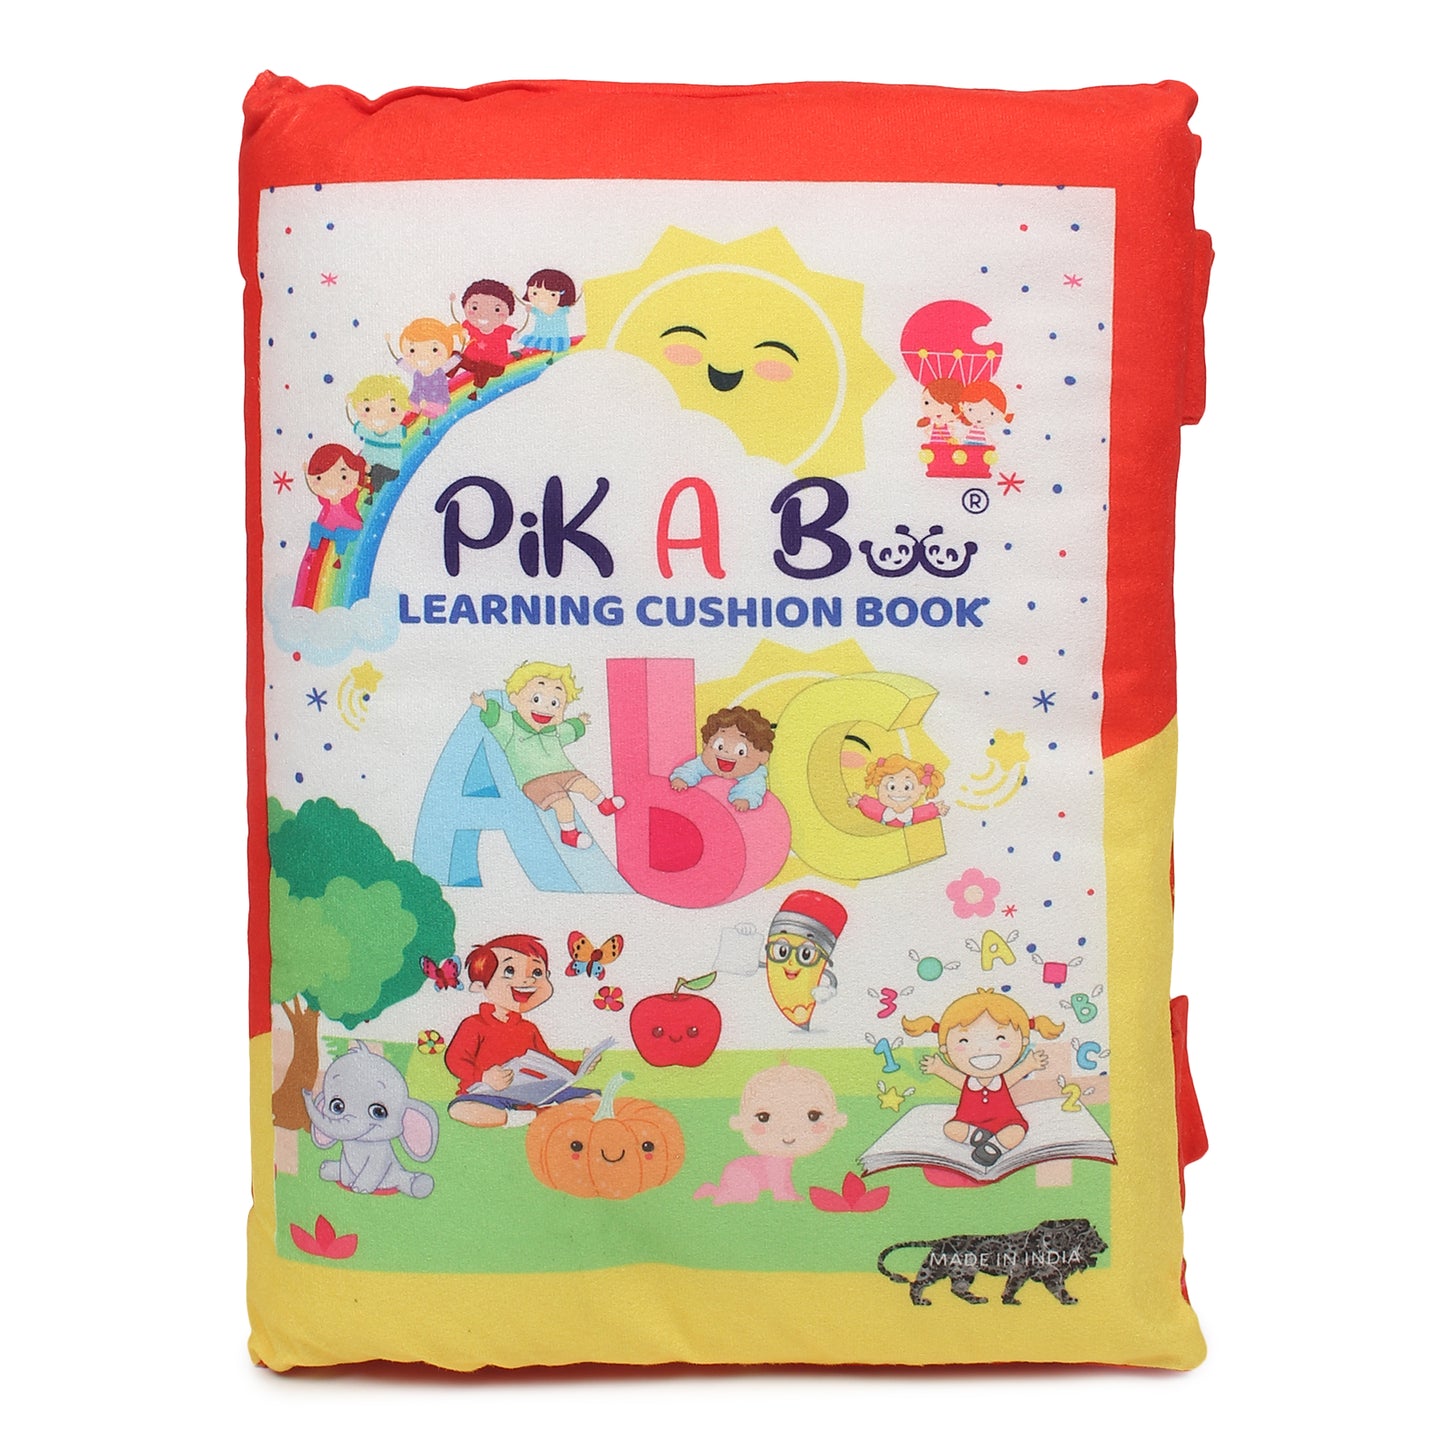 PiK A BOO Red Learning Cushion Book Level 1 with English Rhymes